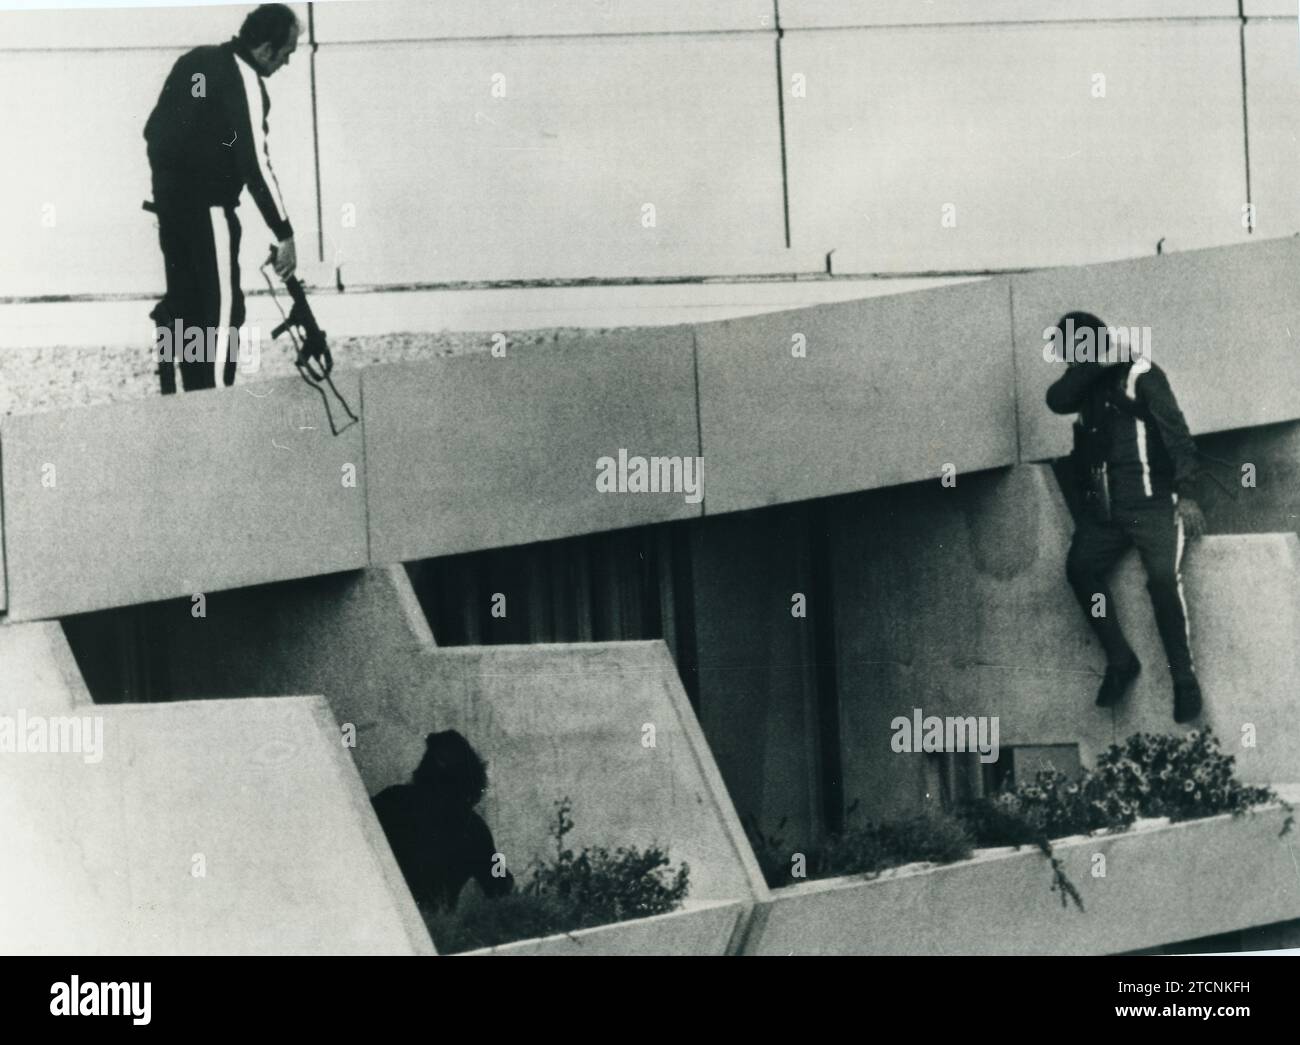 Munich (Germany), 09/05/1972. Attack against the headquarters of the Israeli Olympic team during the celebration of the 1972 Munich Olympics. In the image, police with machine guns and dressed as athletes patrol through the Olympic Village, where the terrorist organization 'Black September' is holding hostages Israeli team members. Credit: Album / Archivo ABC Stock Photo